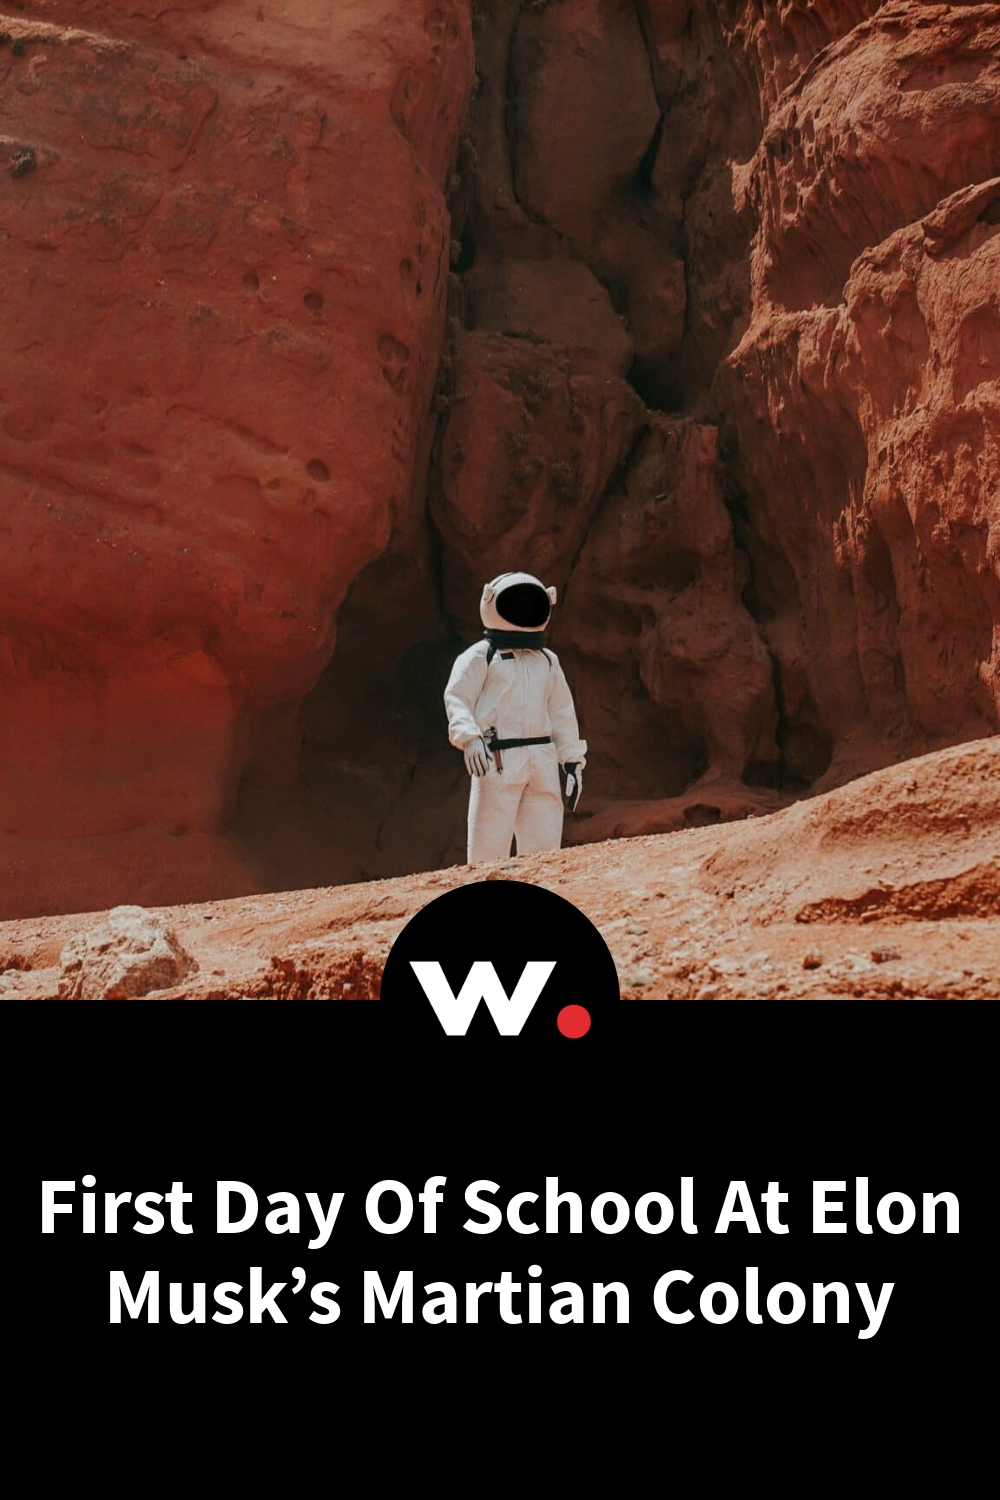 First Day Of School At Elon Musk’s Martian Colony